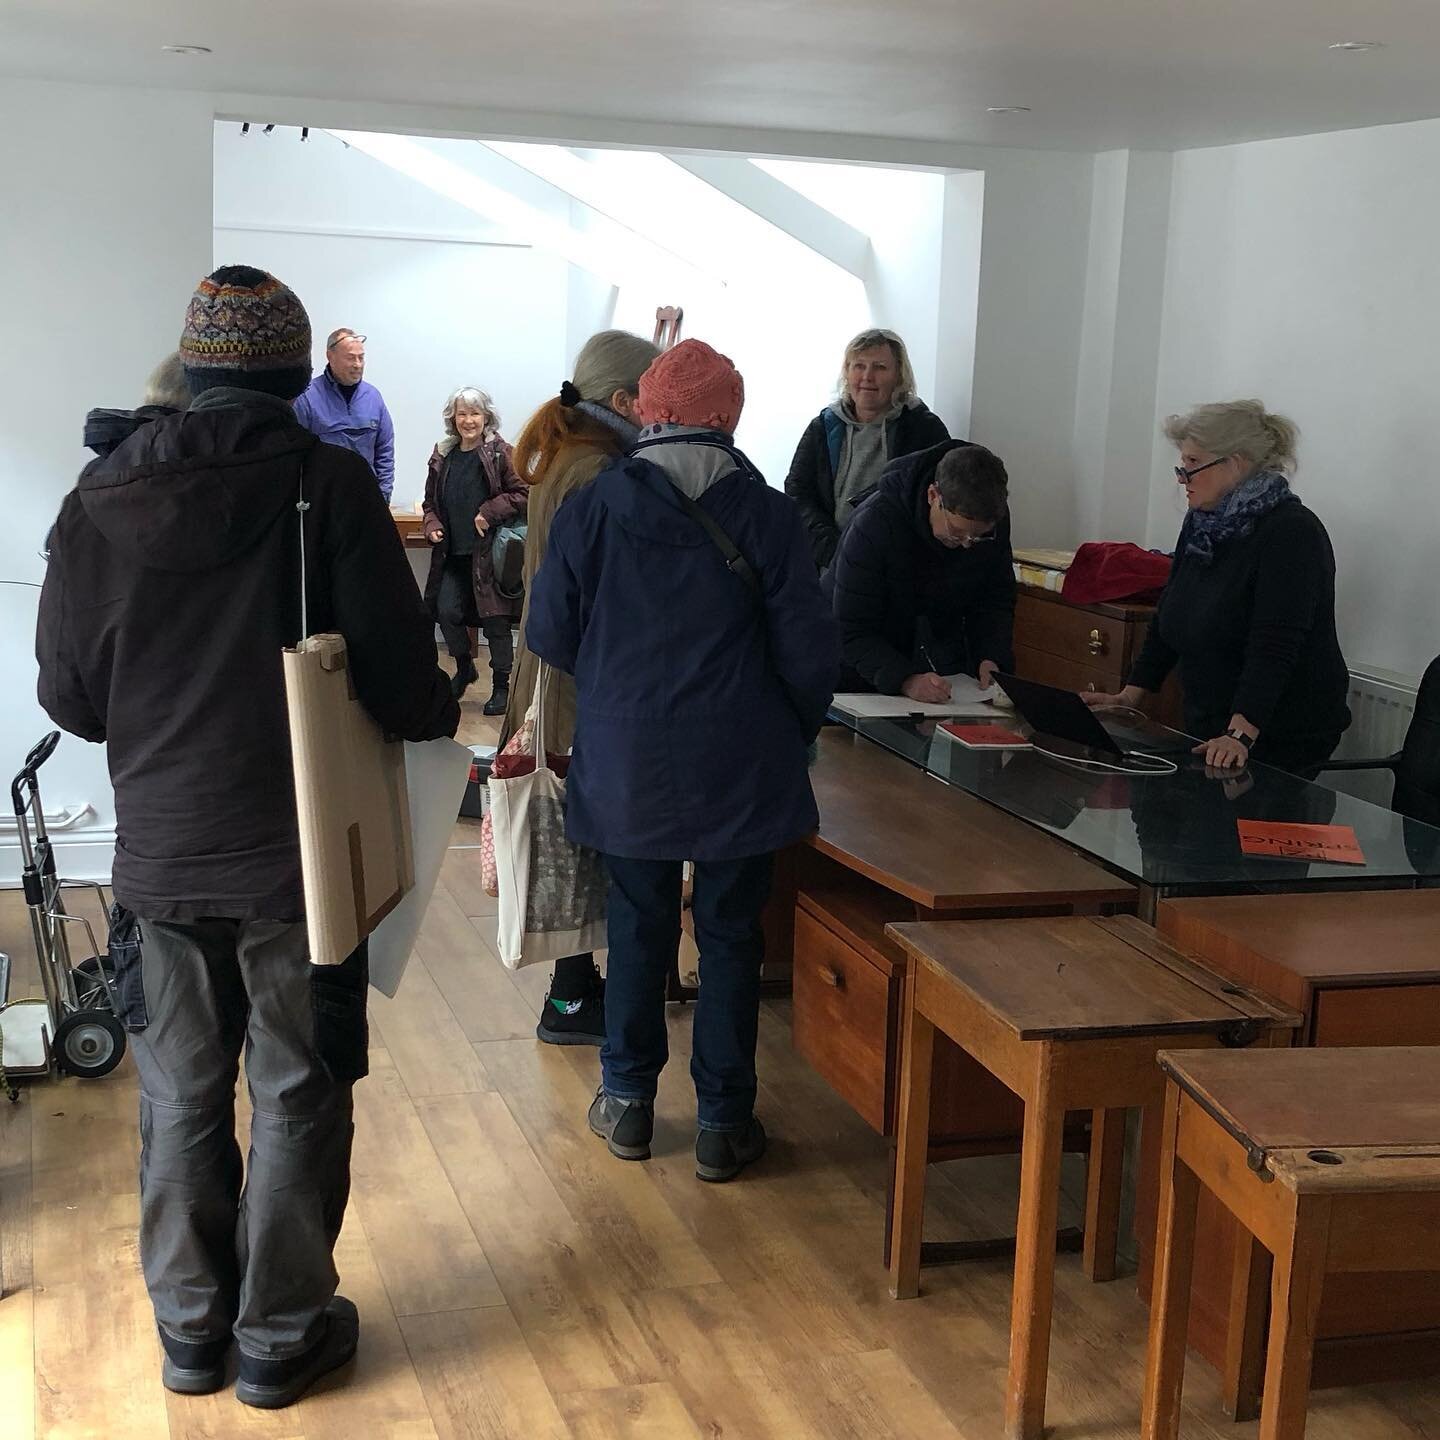 Penzance Studios Spring Show Group ONE is hanging today!! Exciting!!
The Spring Show for group one is open daily 11-4pm from 7th - 19th March.
Hope to see you here!! 

#cornwallartists #penzancestudios #daisylainggallery